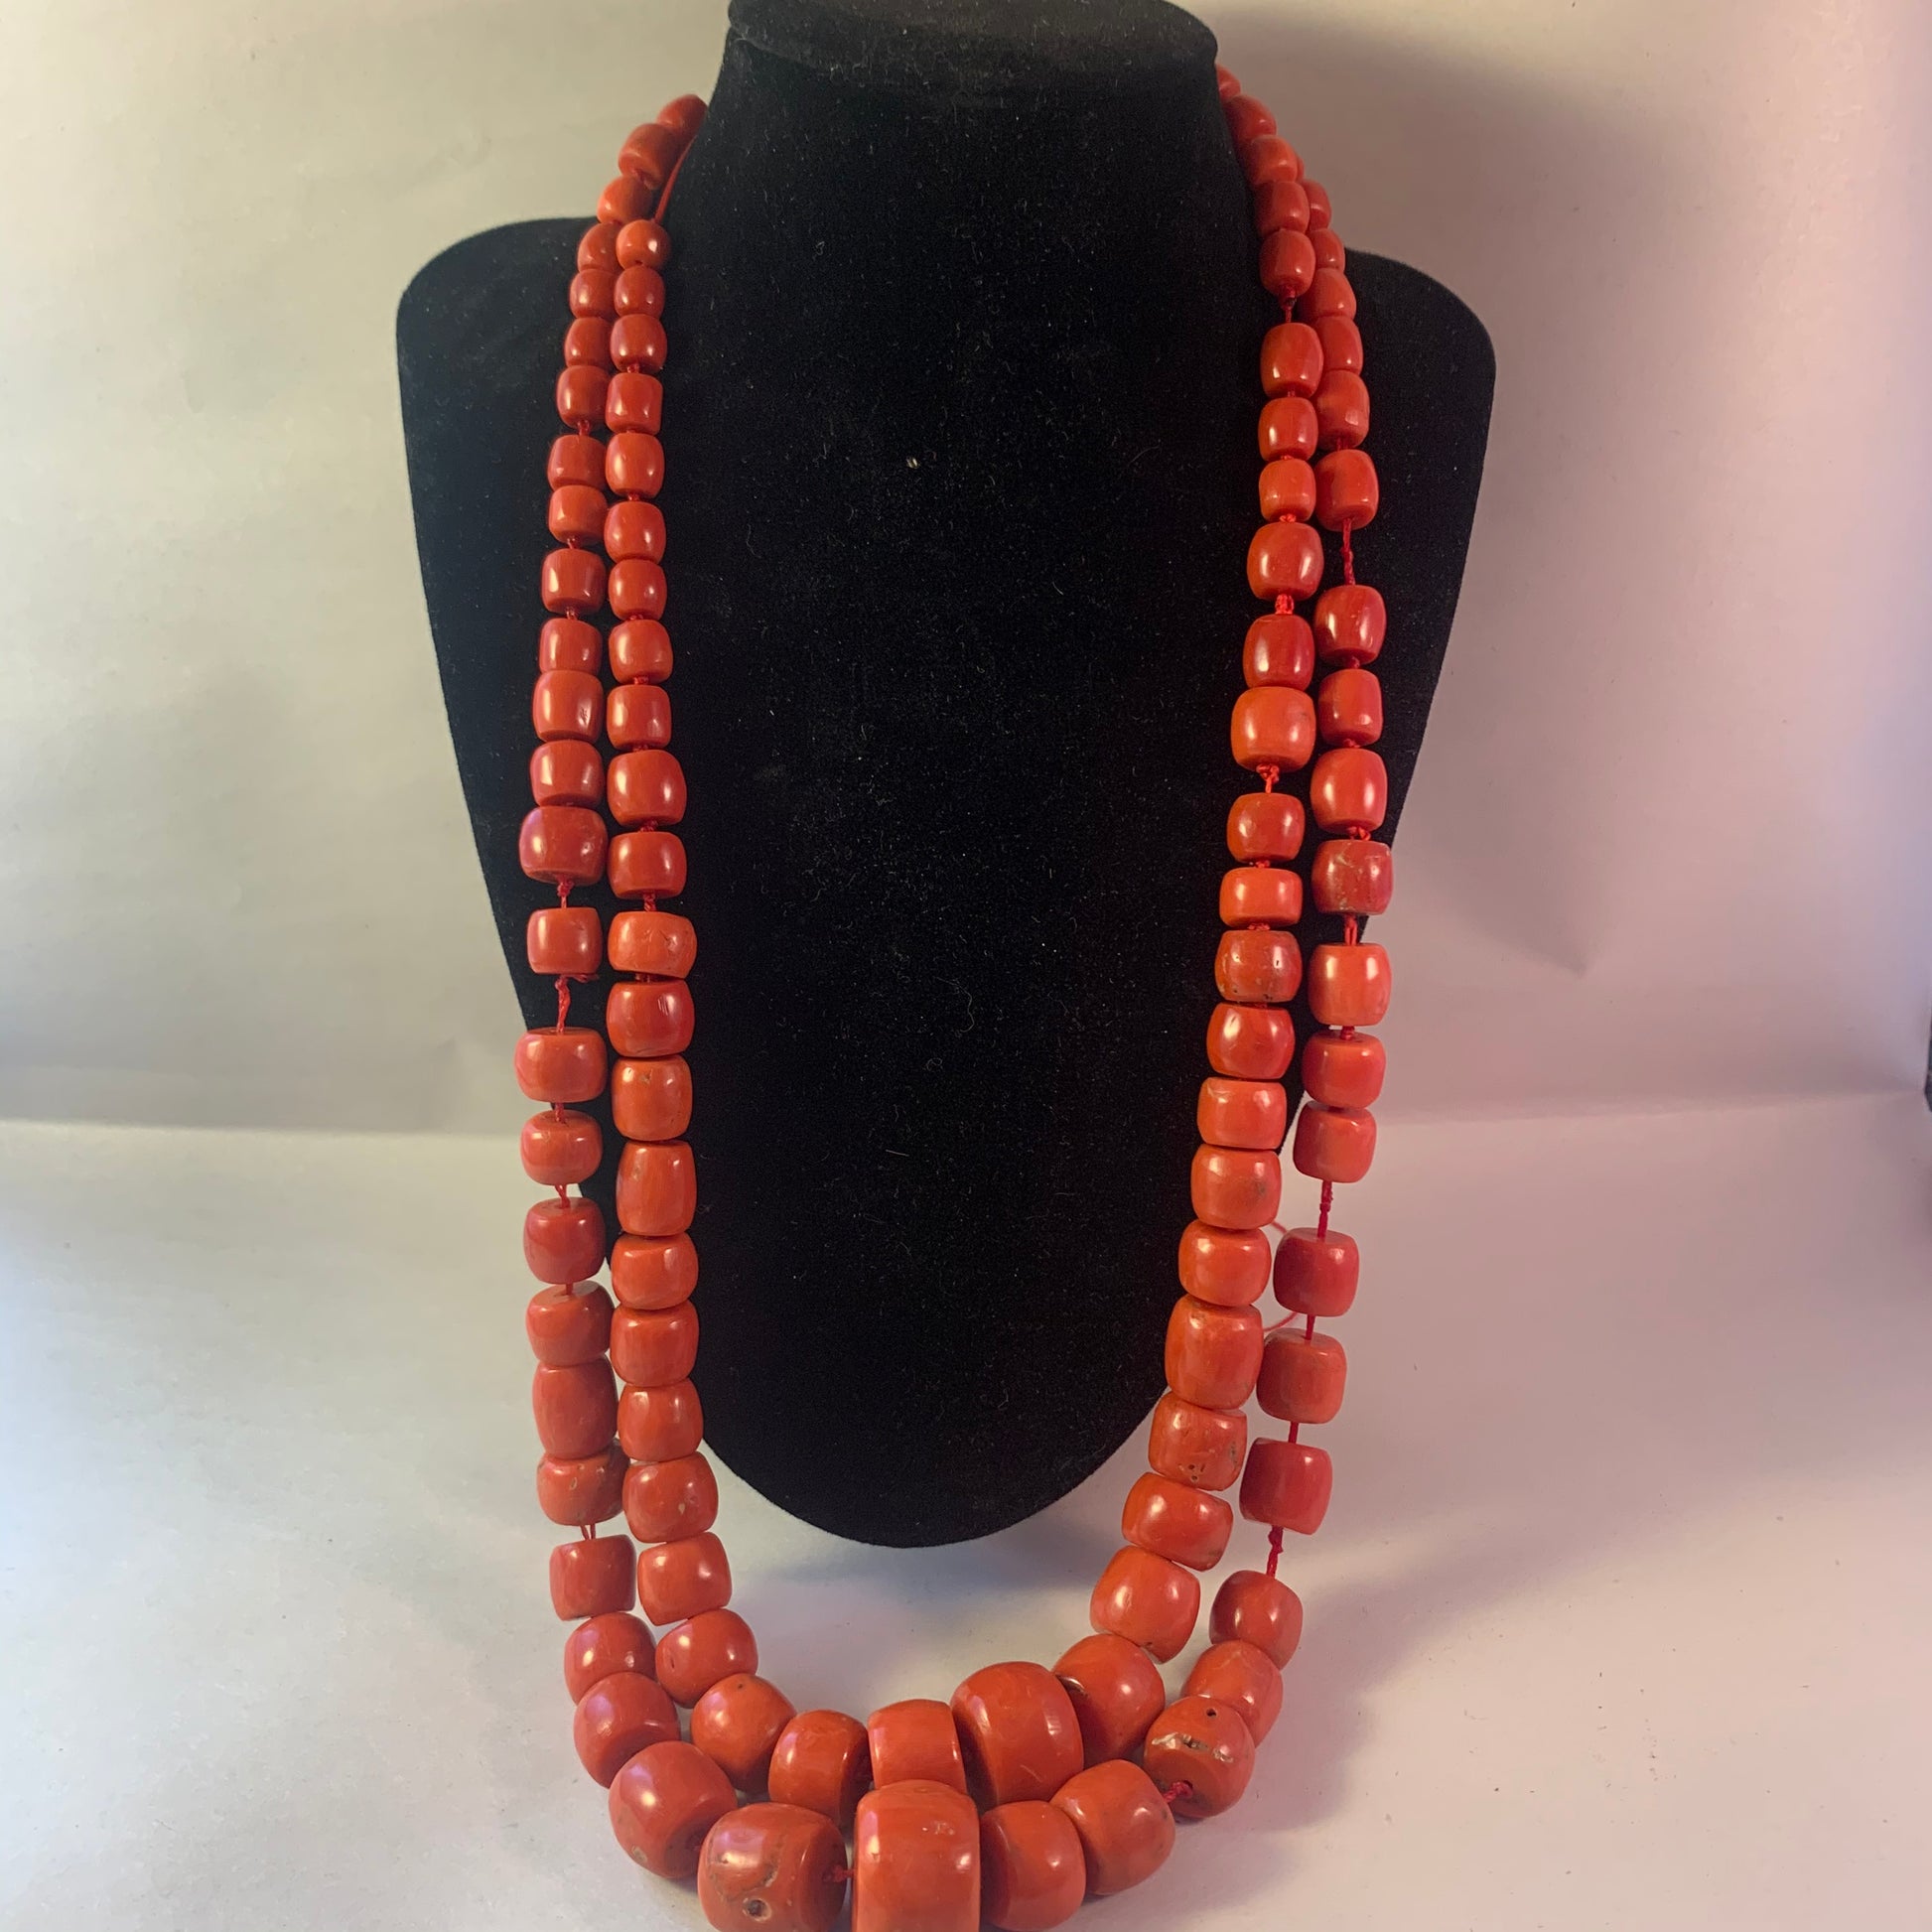 coral bead necklace, multi stand coral bead necklace, estate jewelry, Coral  beads, Coral necklace, Natural coral beads